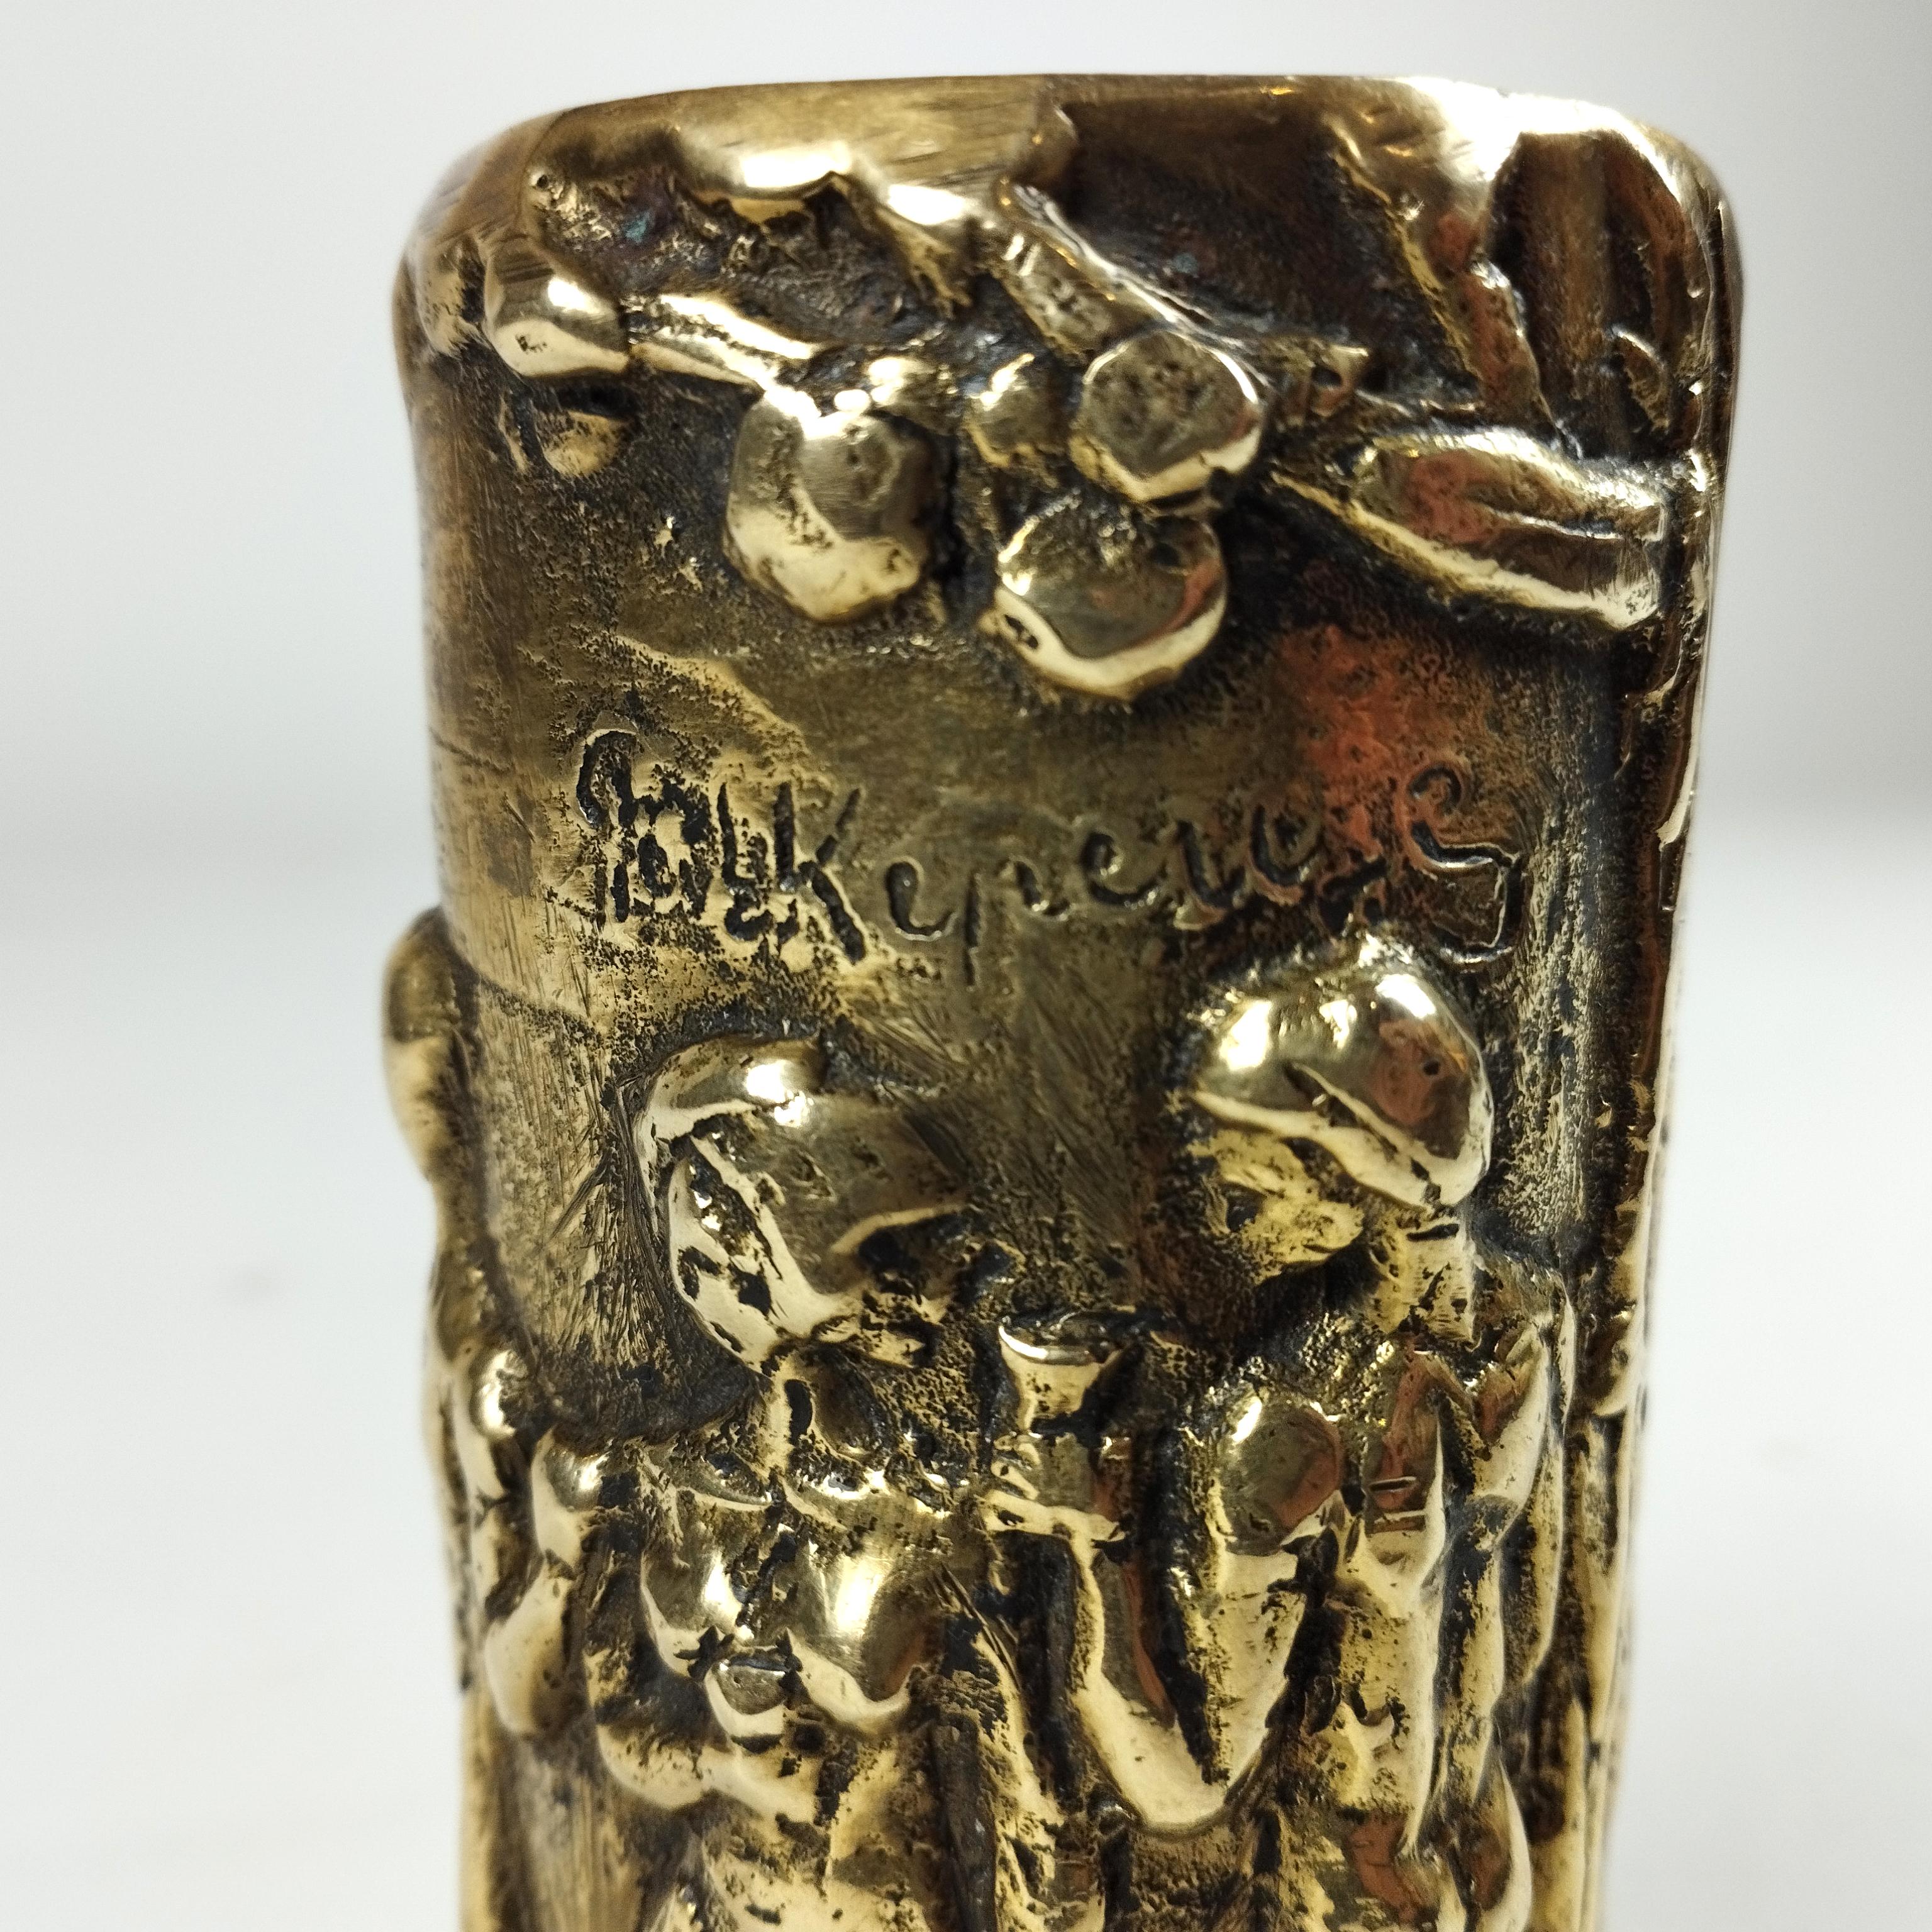 Pal Kepenyes Mexican Brutalist Bronze Flower Vase with Adam and Eve Scenes For Sale 1